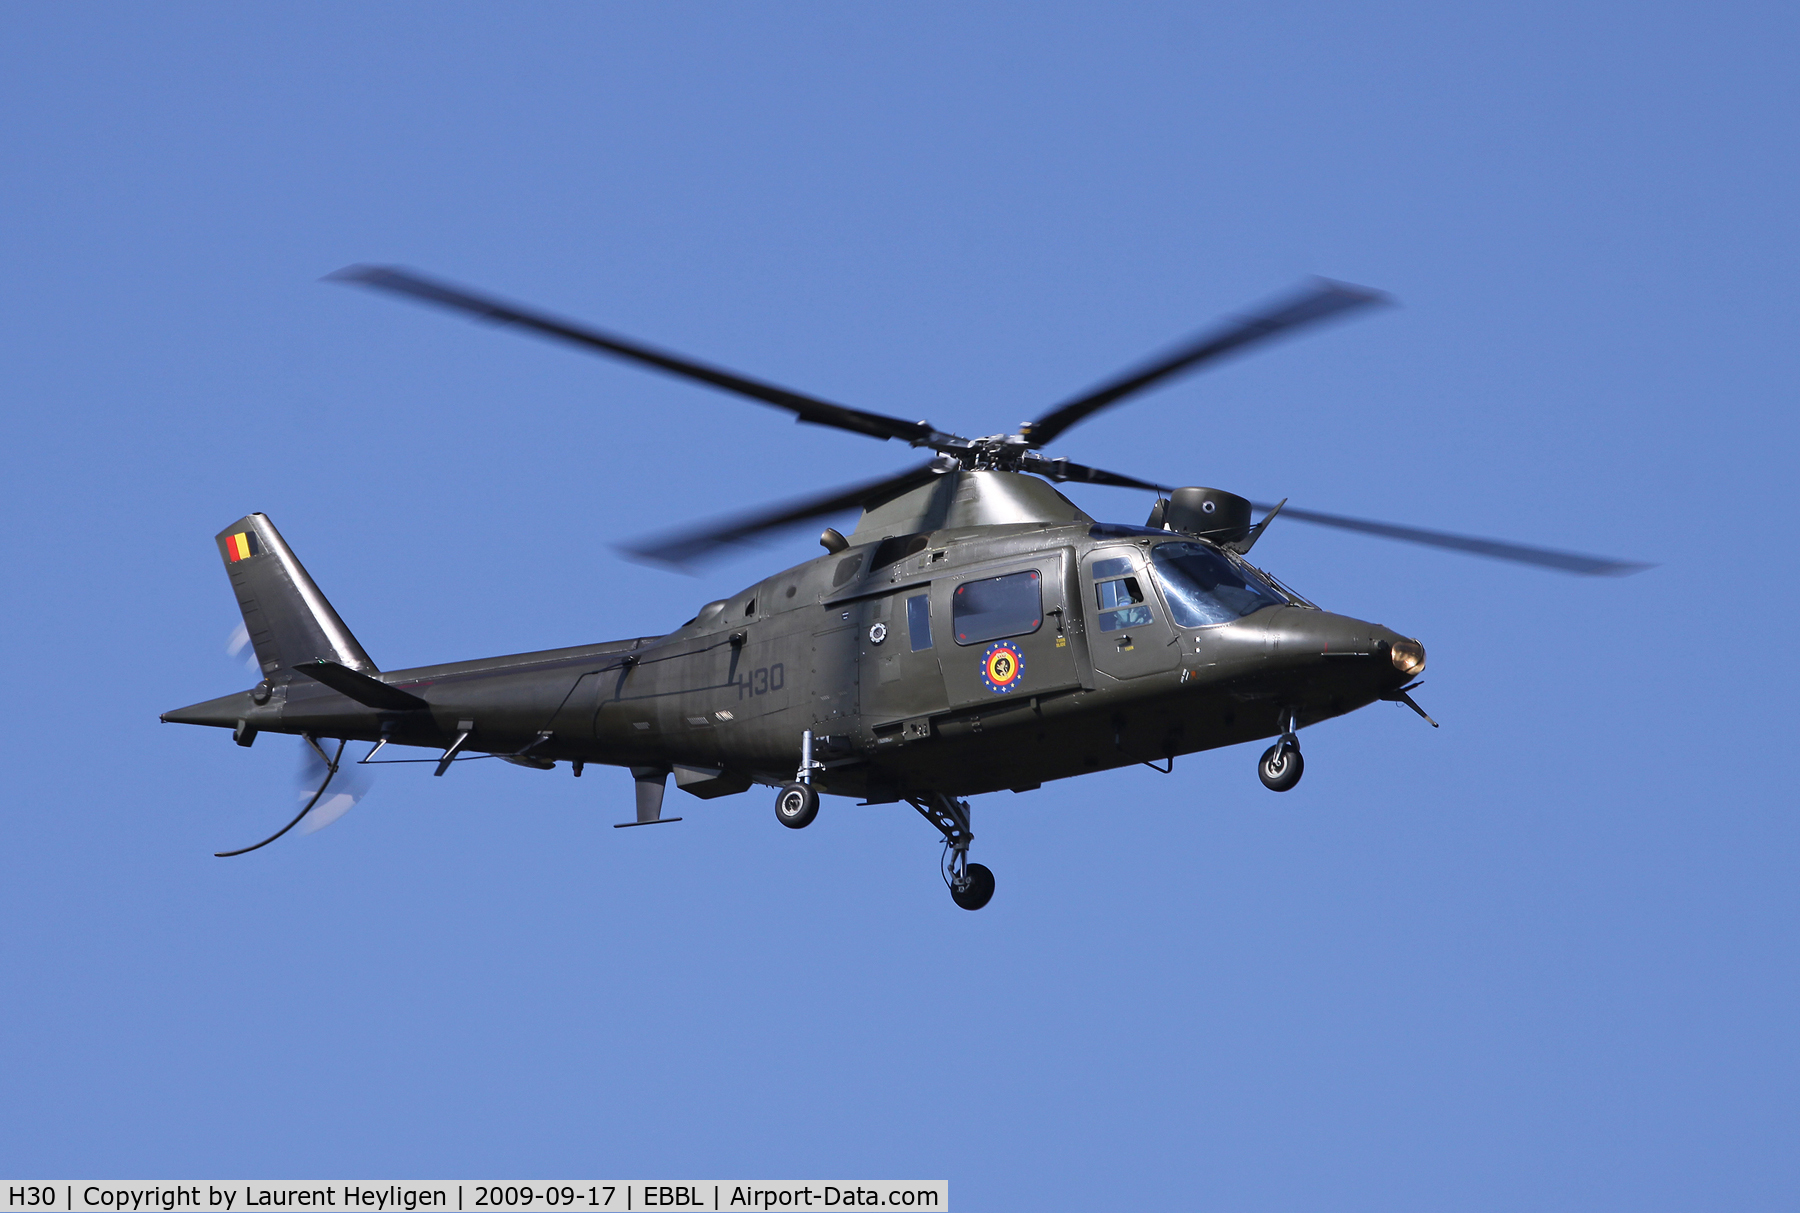 H30, Agusta A-109BA C/N 0330, Fly-by at Kleine Brogel during the NATO Tiger Meet 2009.